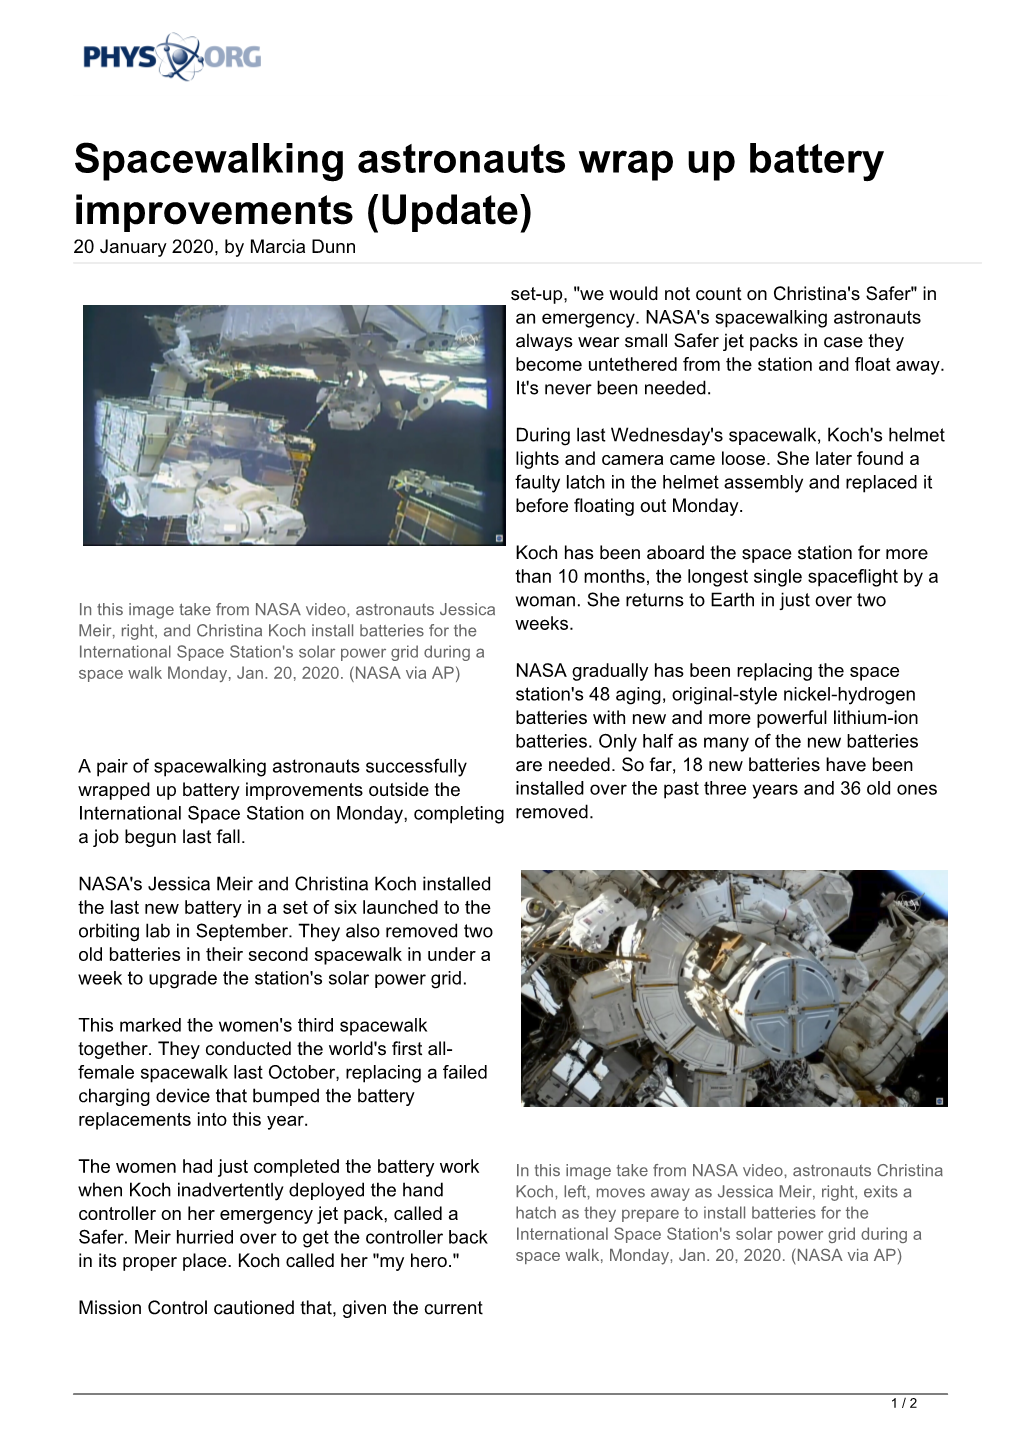 Spacewalking Astronauts Wrap up Battery Improvements (Update) 20 January 2020, by Marcia Dunn